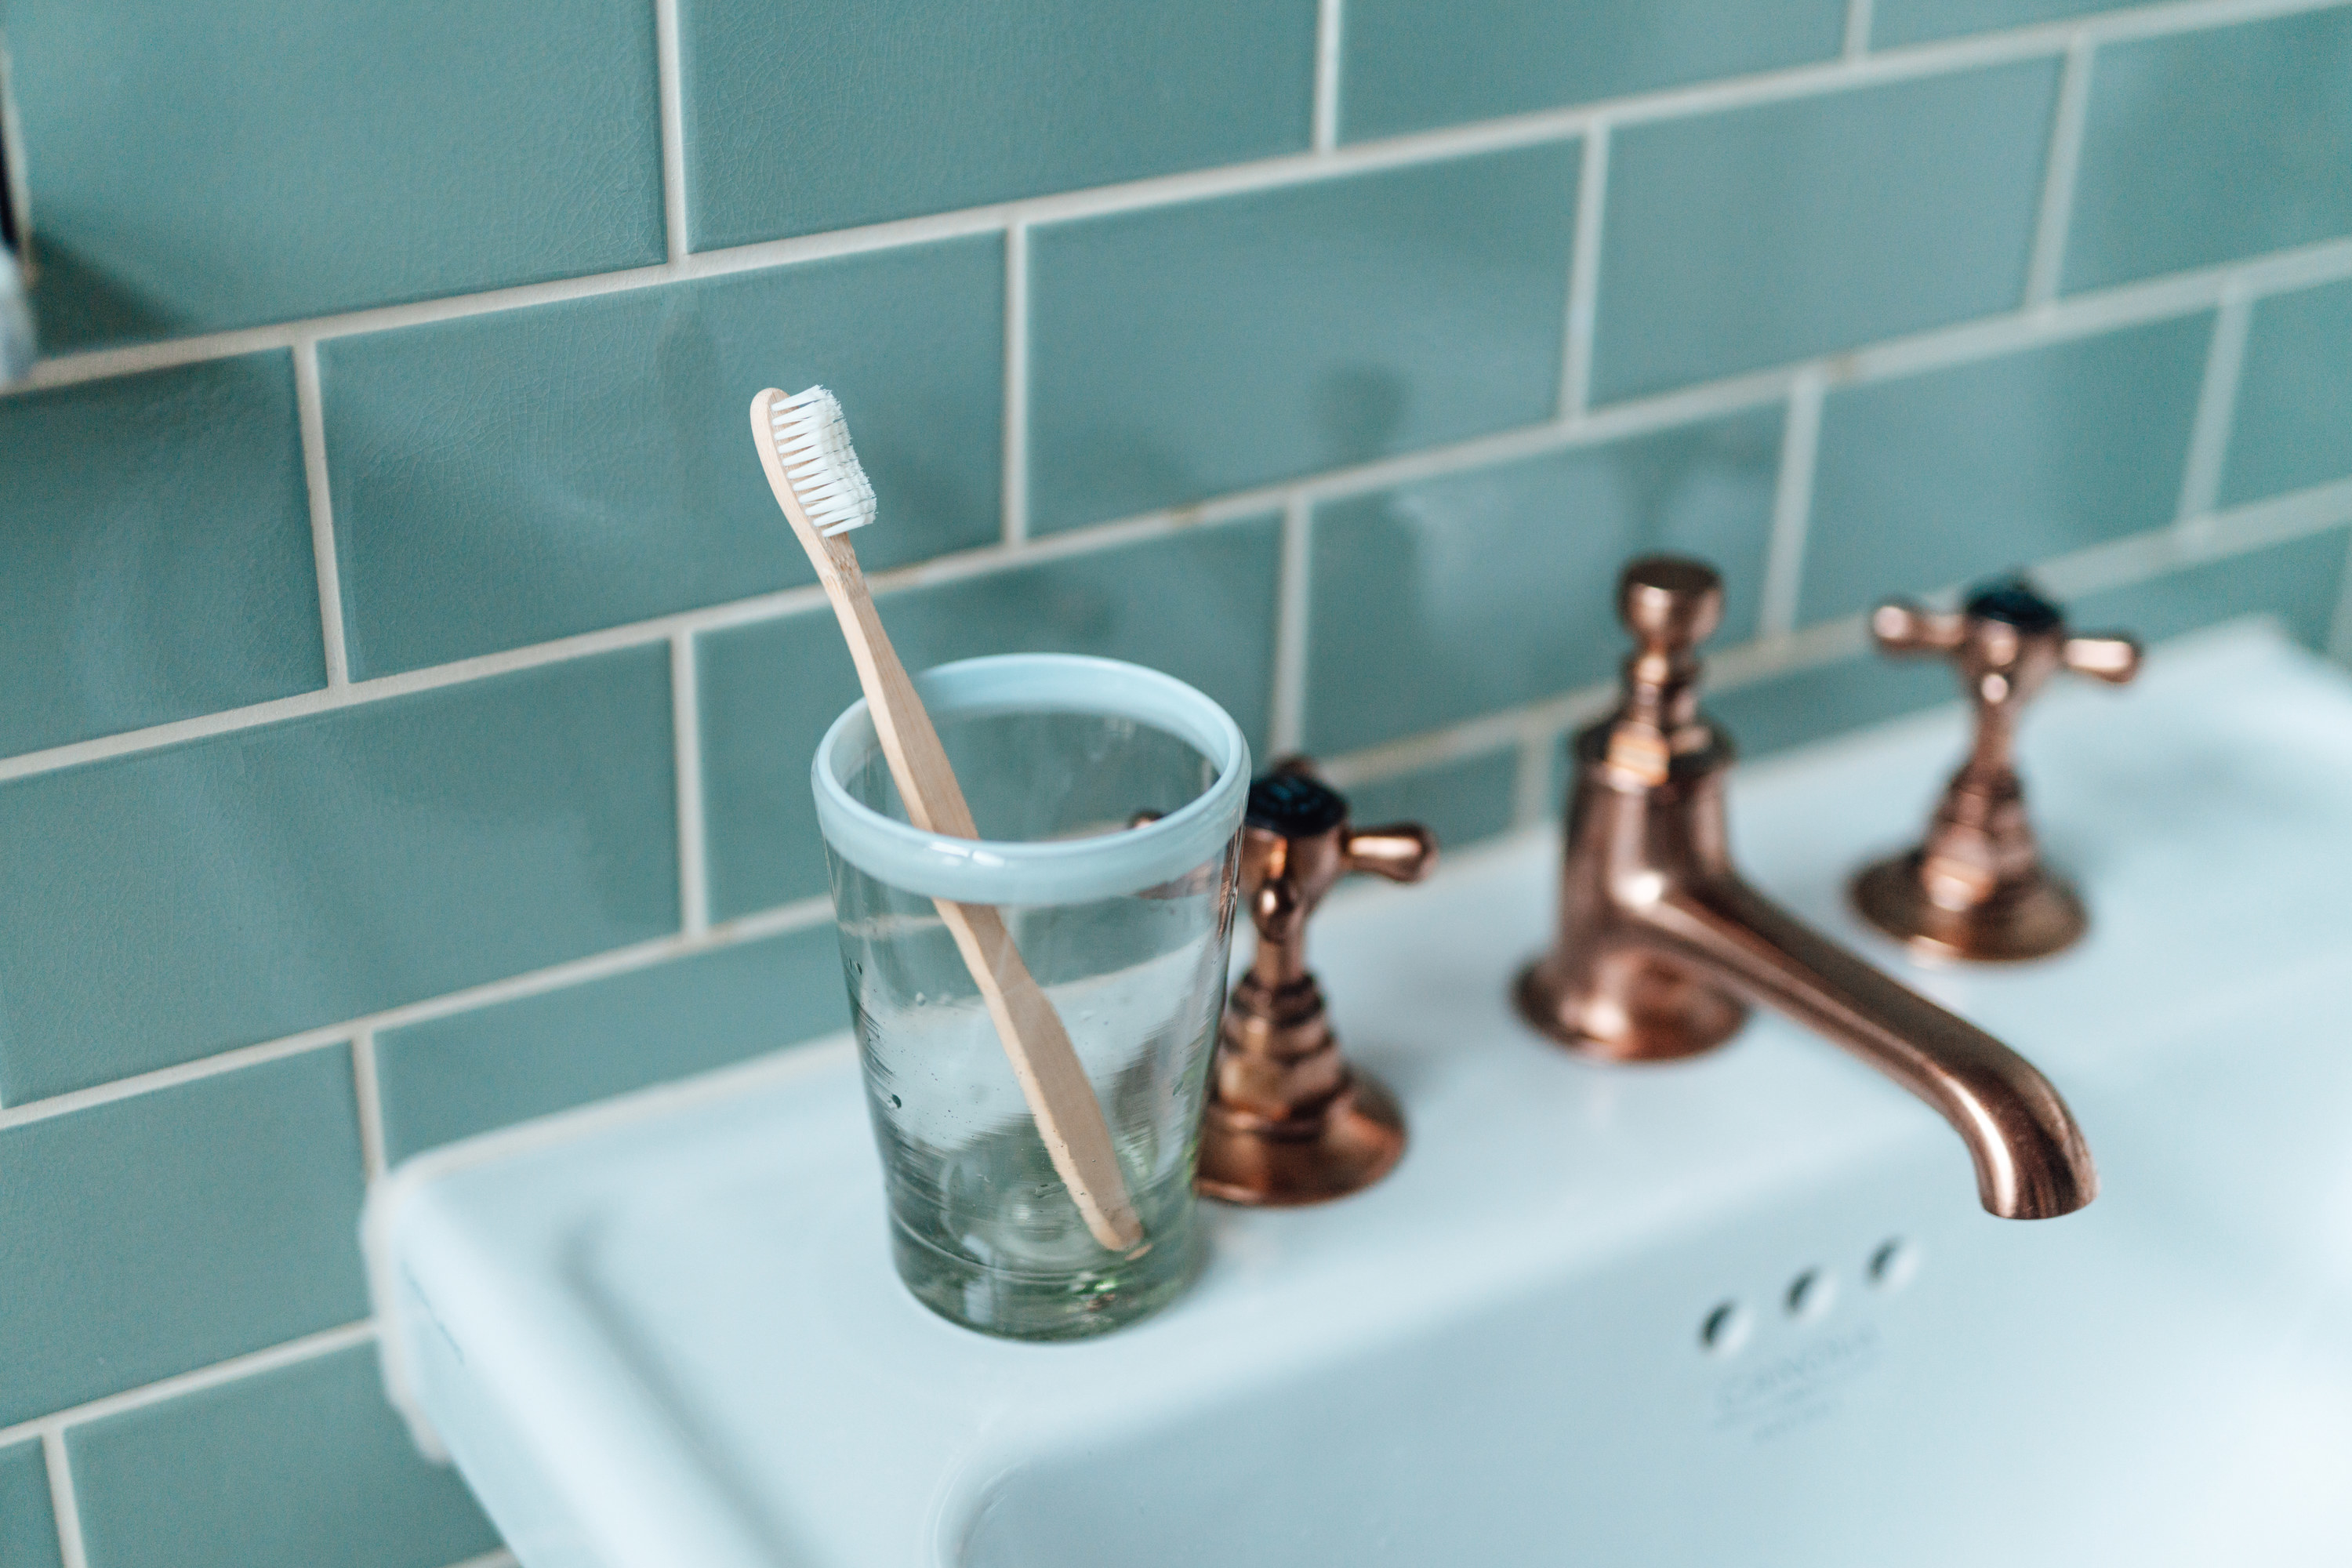 A toothbrush in a toothbrush holder on a sink